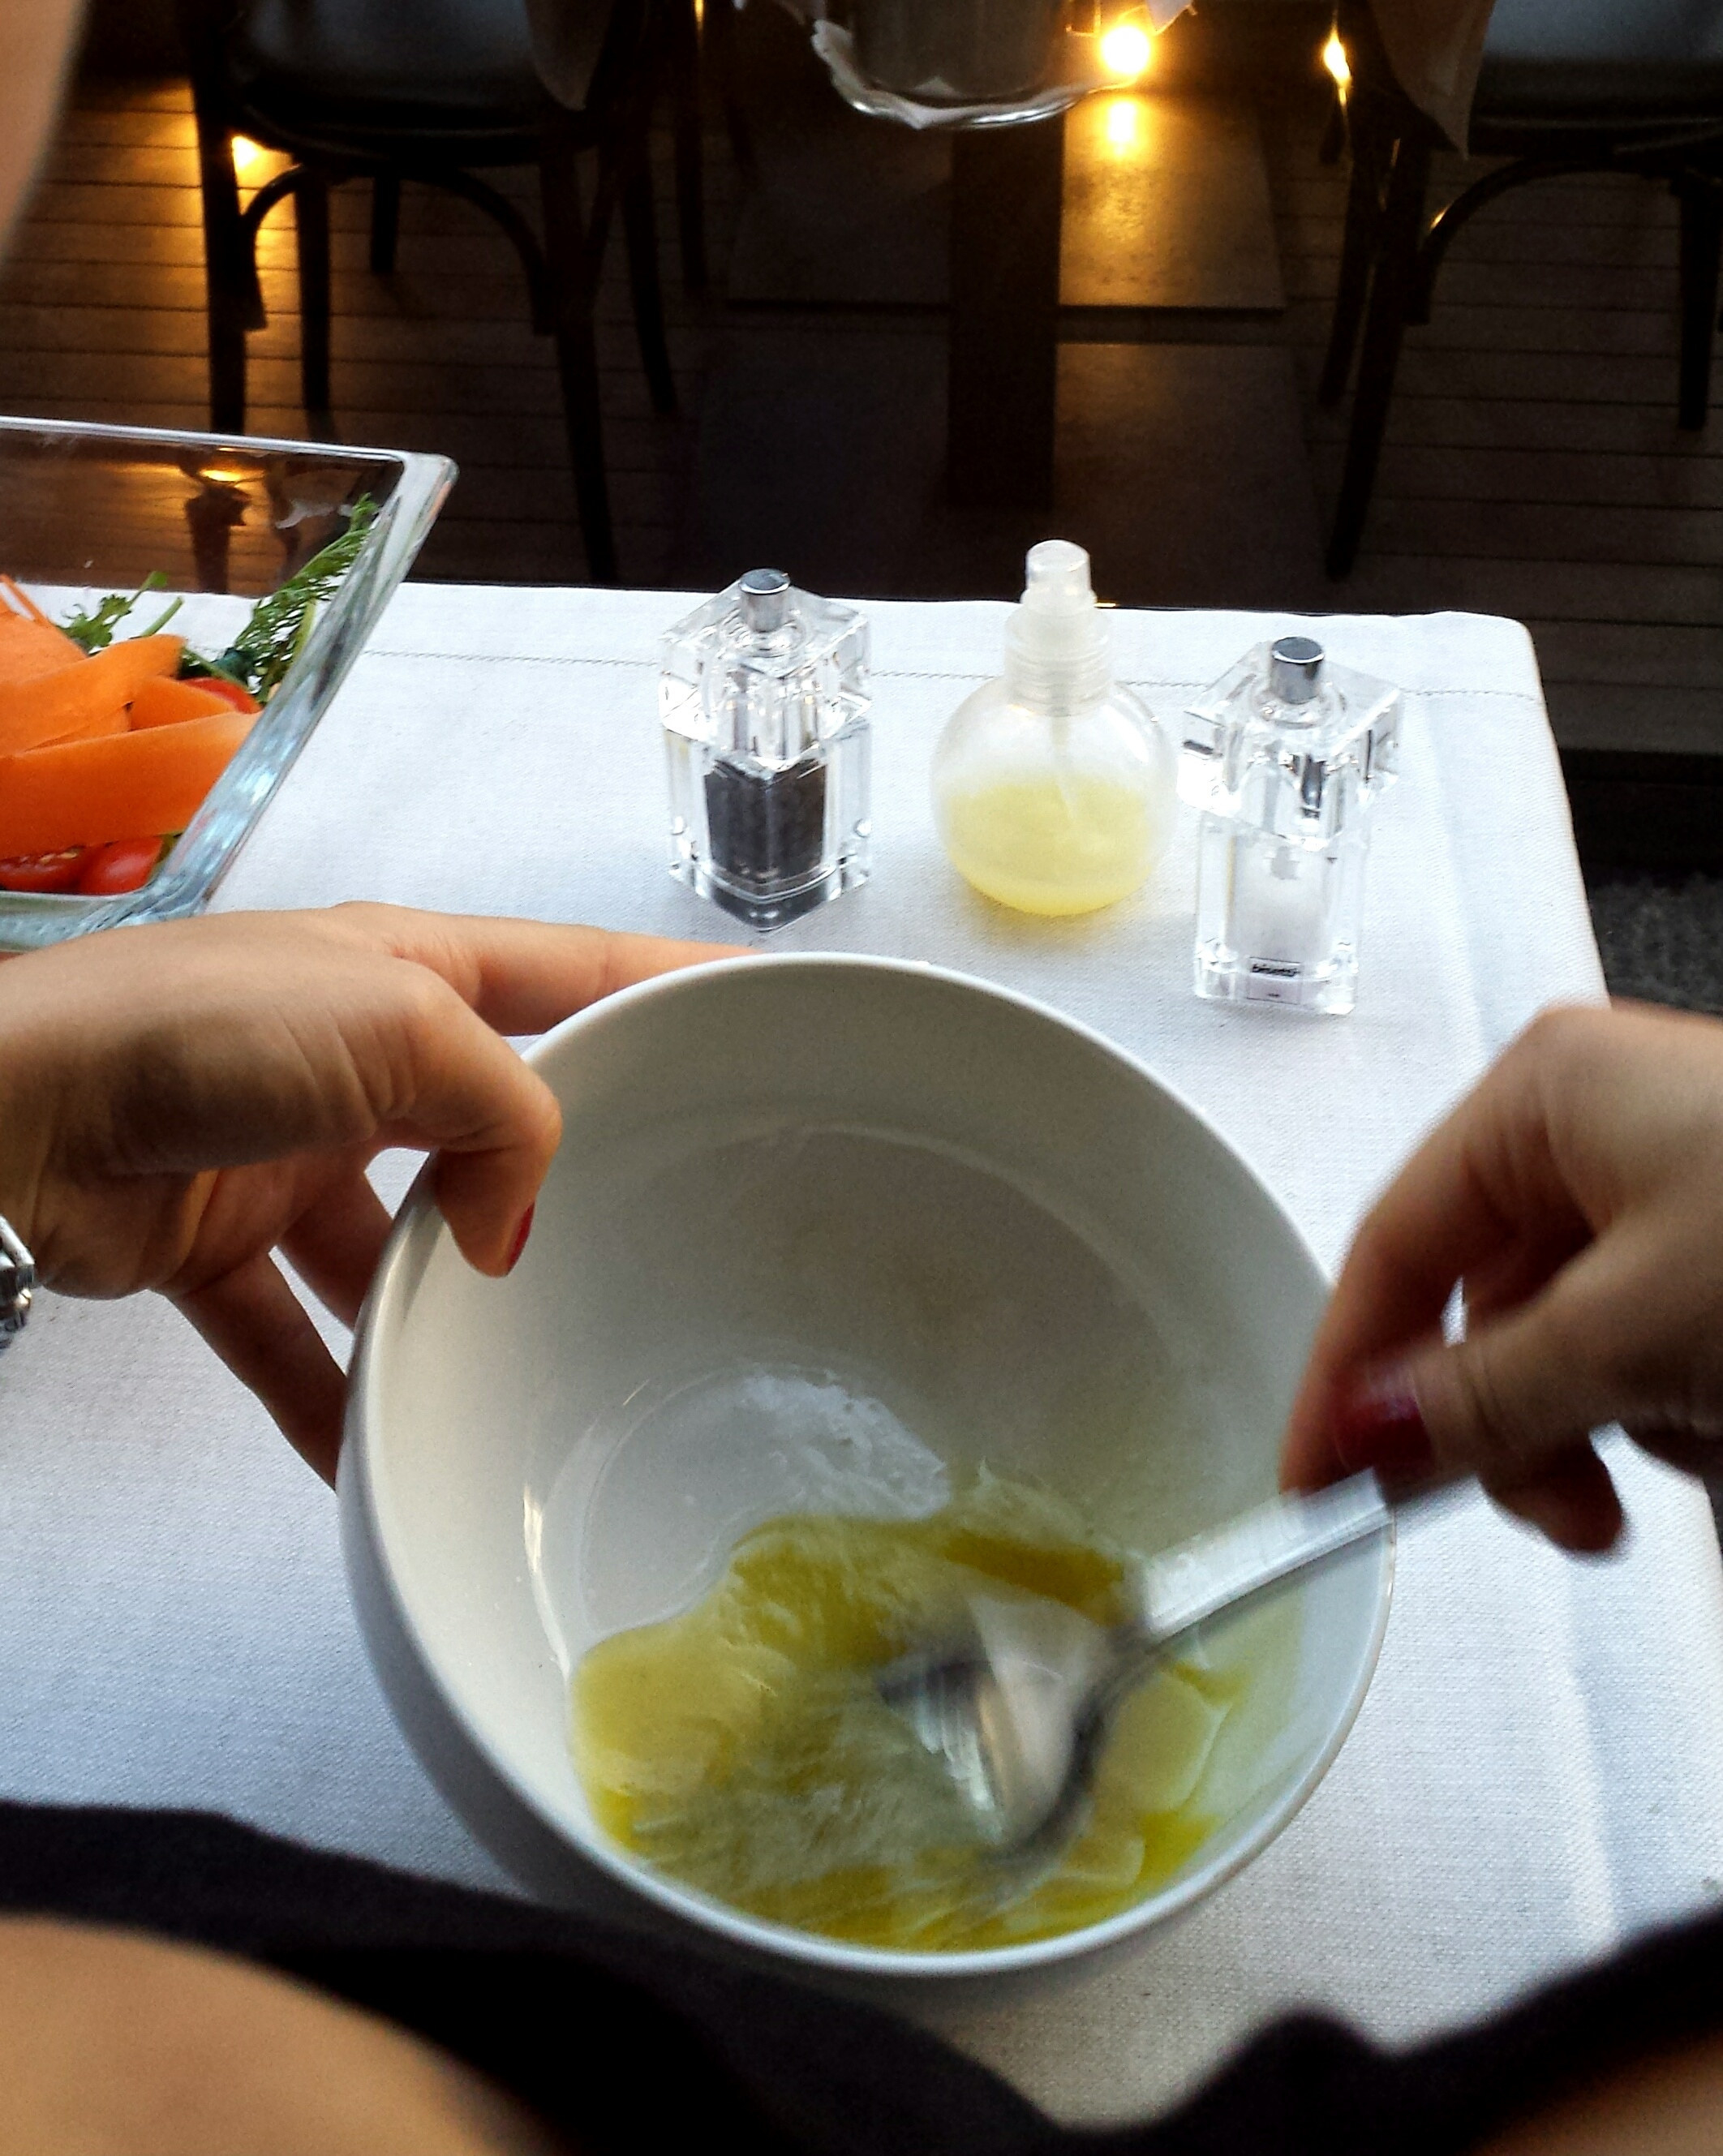 A woman mixing salad dressing in a bowl.